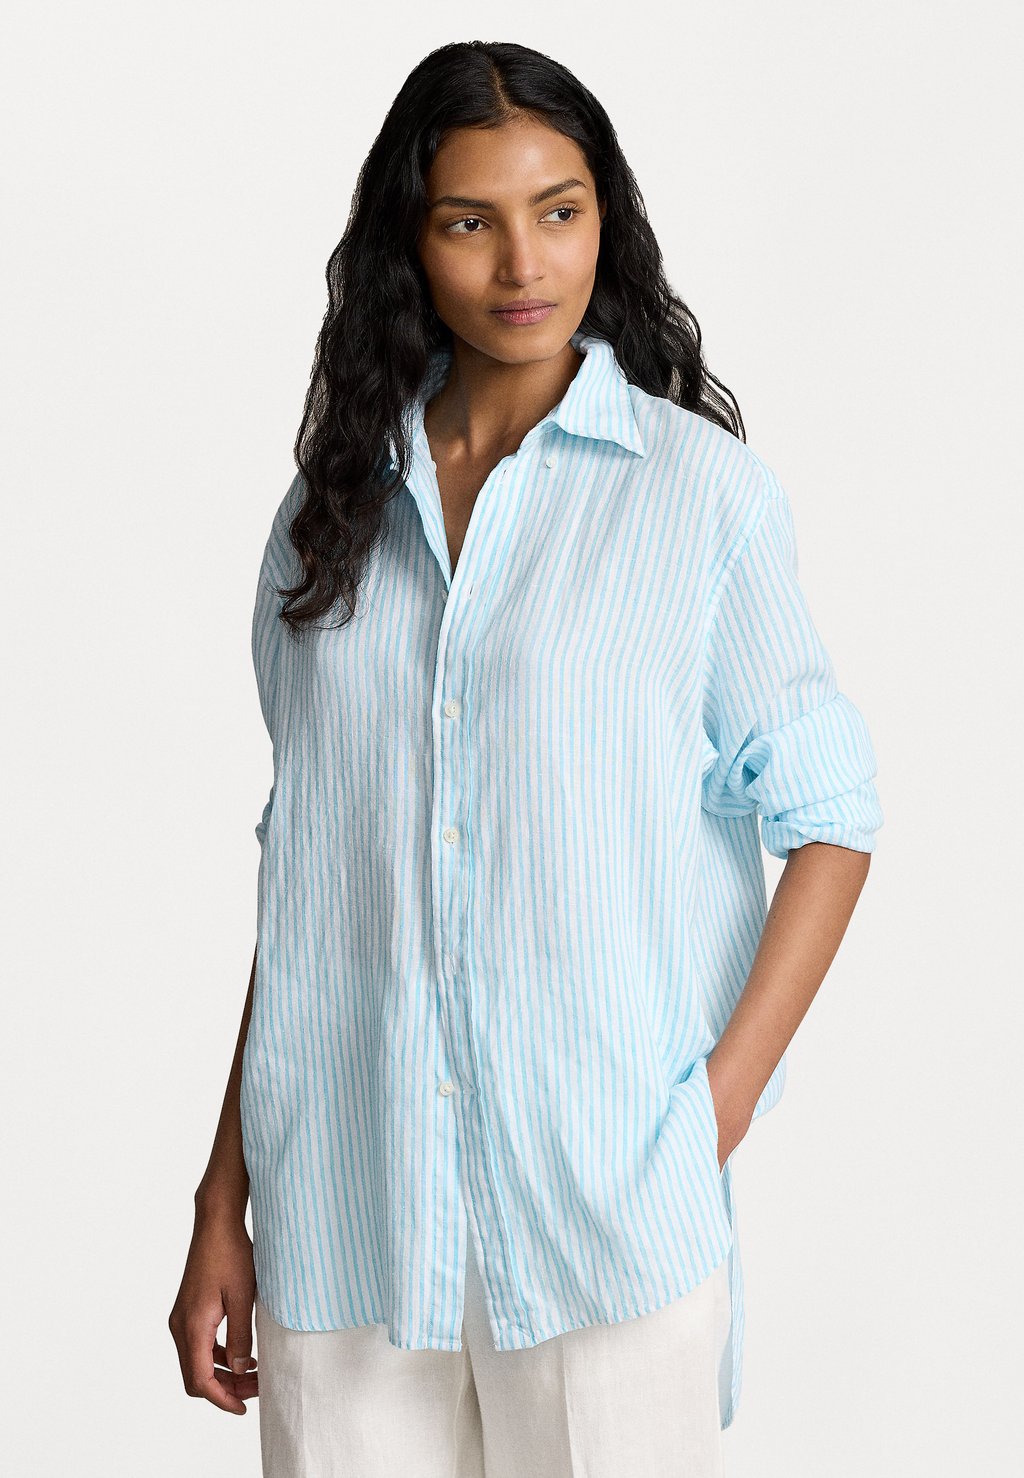 Блузка-рубашка RELAXED LONG SLEEVE BUTTON FRONT SHIRT Polo Ralph Lauren, цвет turquoise /white